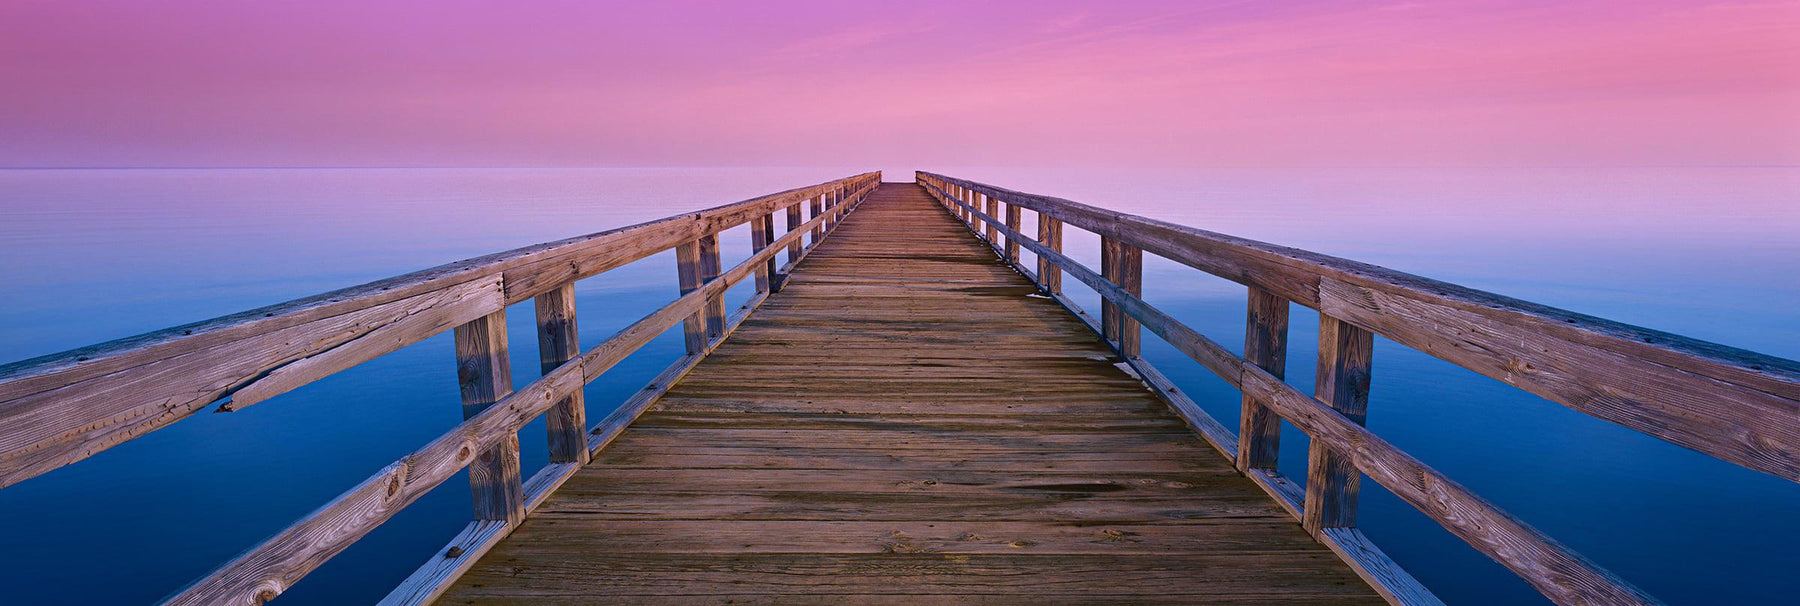 Old wooden pier reaching over the ocean into a pink and purple horizon during a sunrise in Port Mahon Delaware